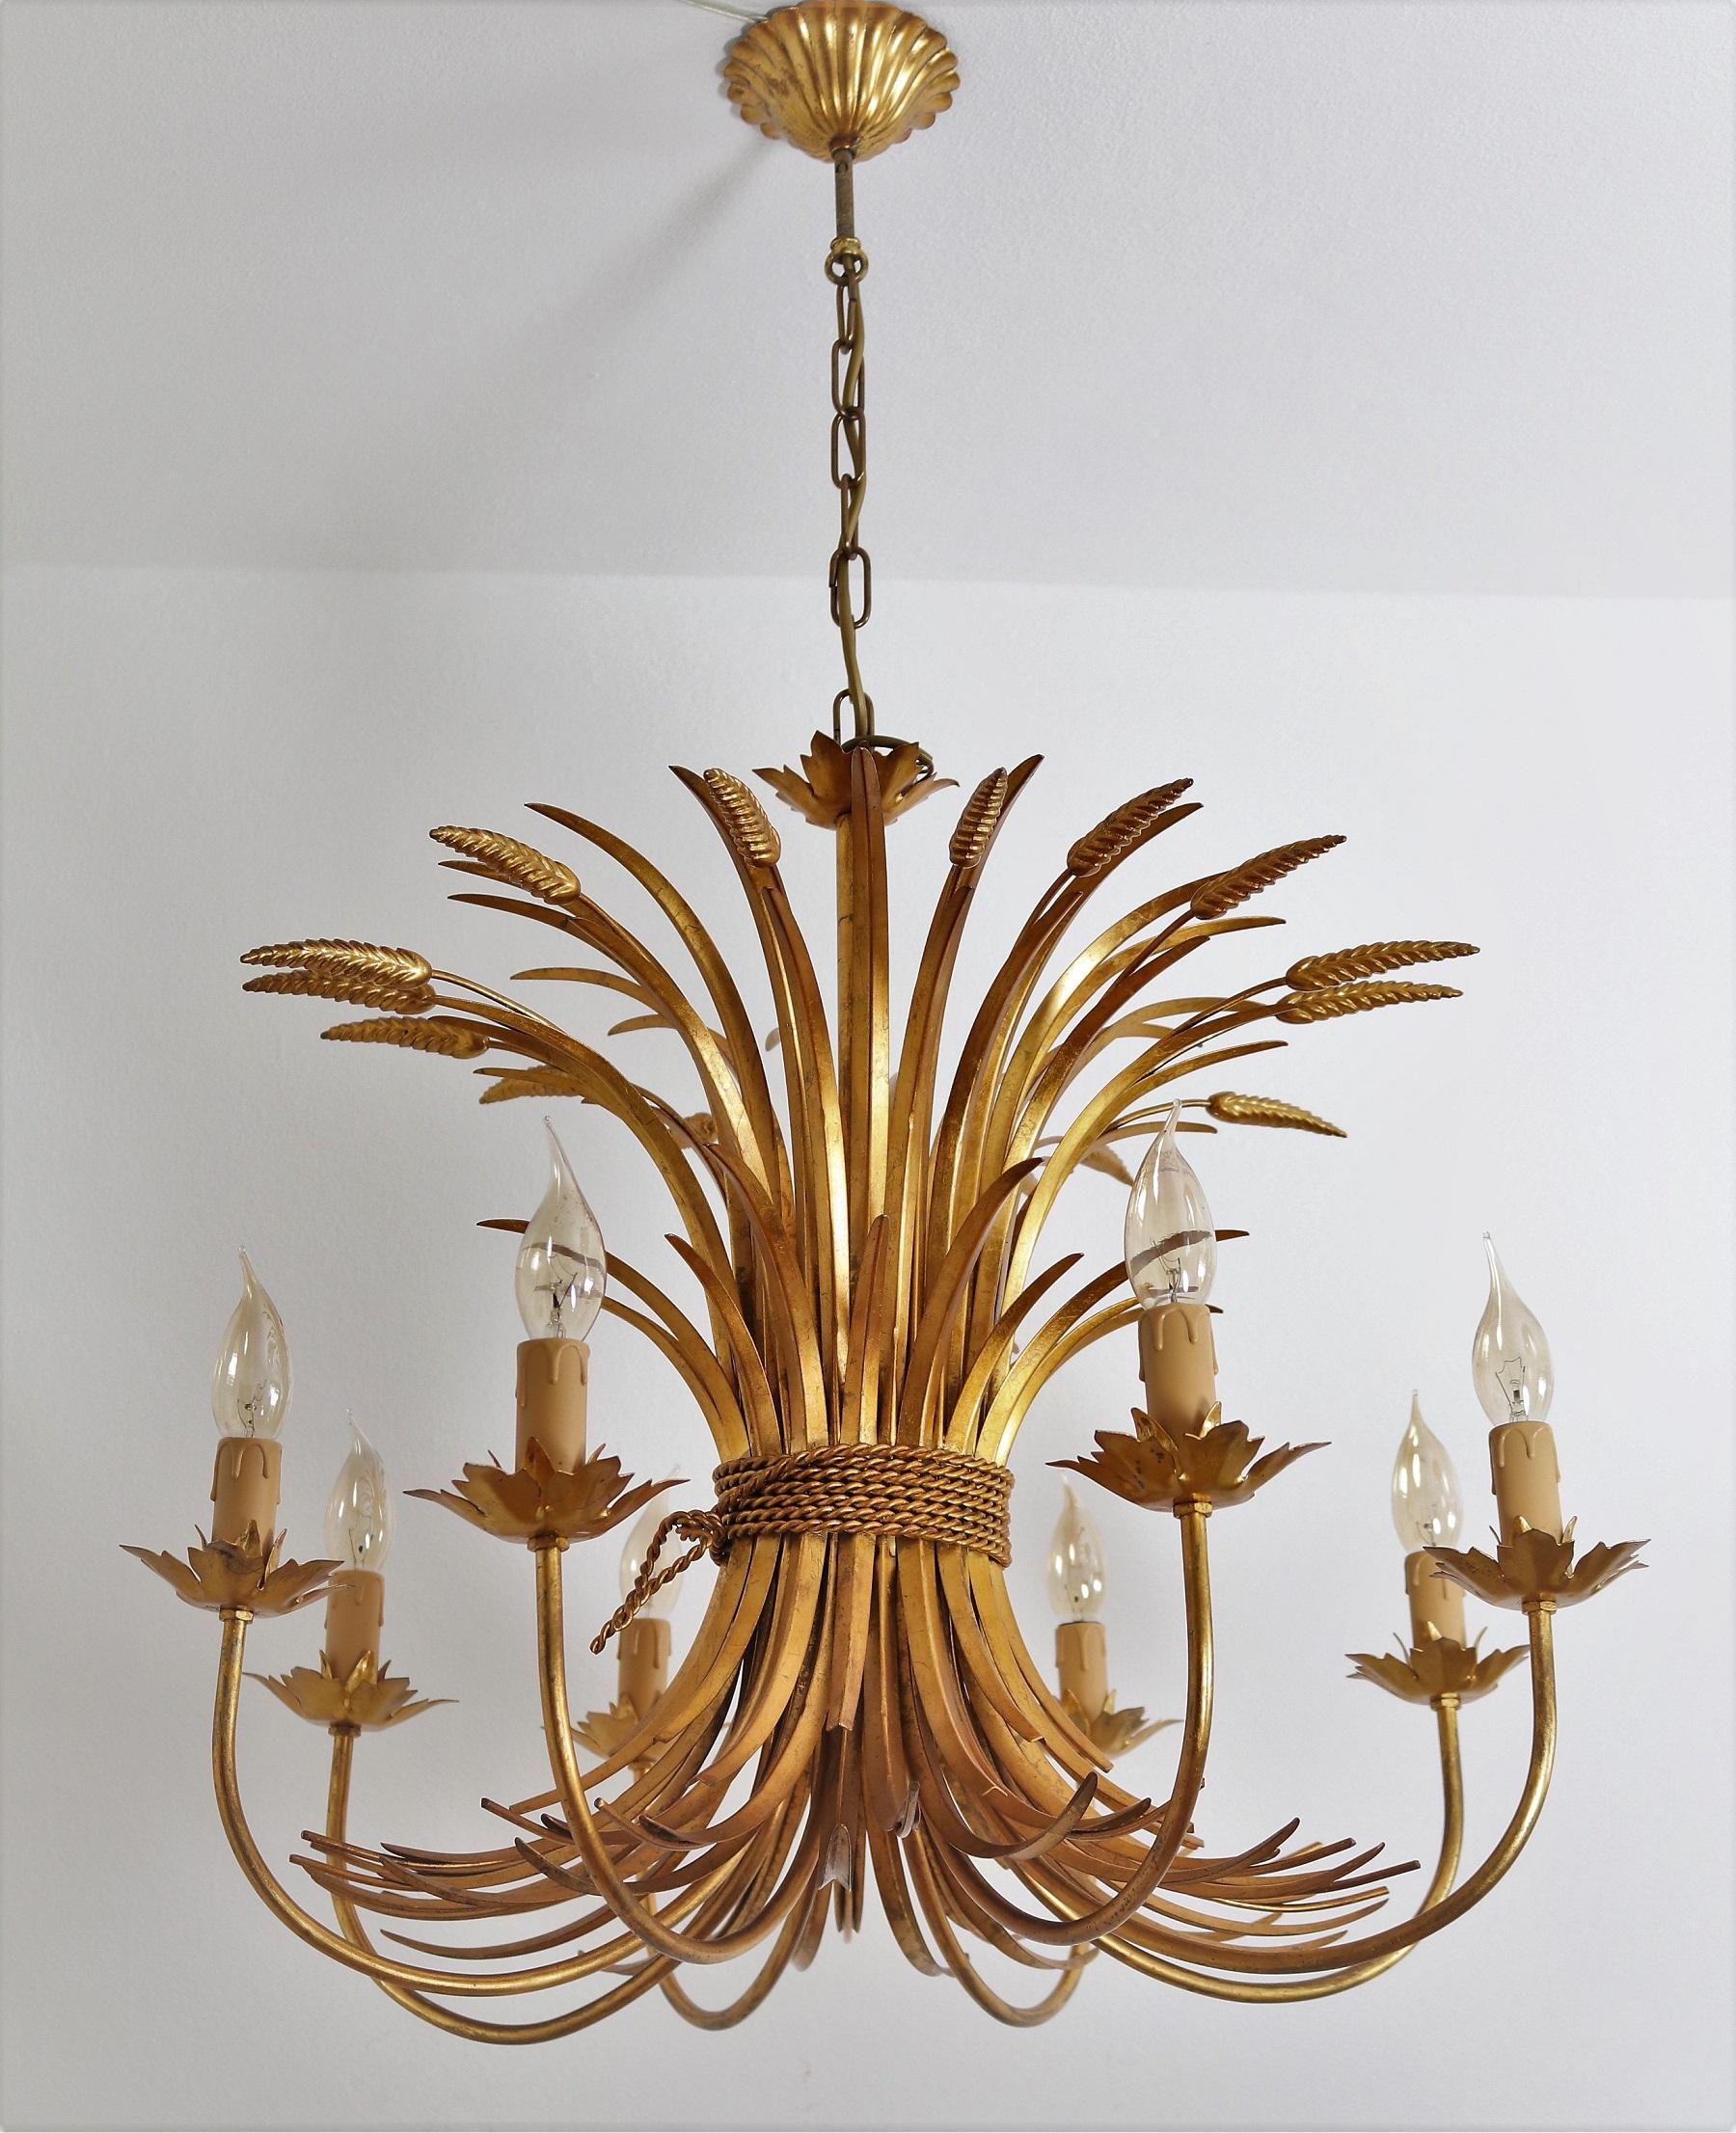 Italian Midcentury 8-Arm Gilt Chandelier with Wheat and Leaves, 1960s 8